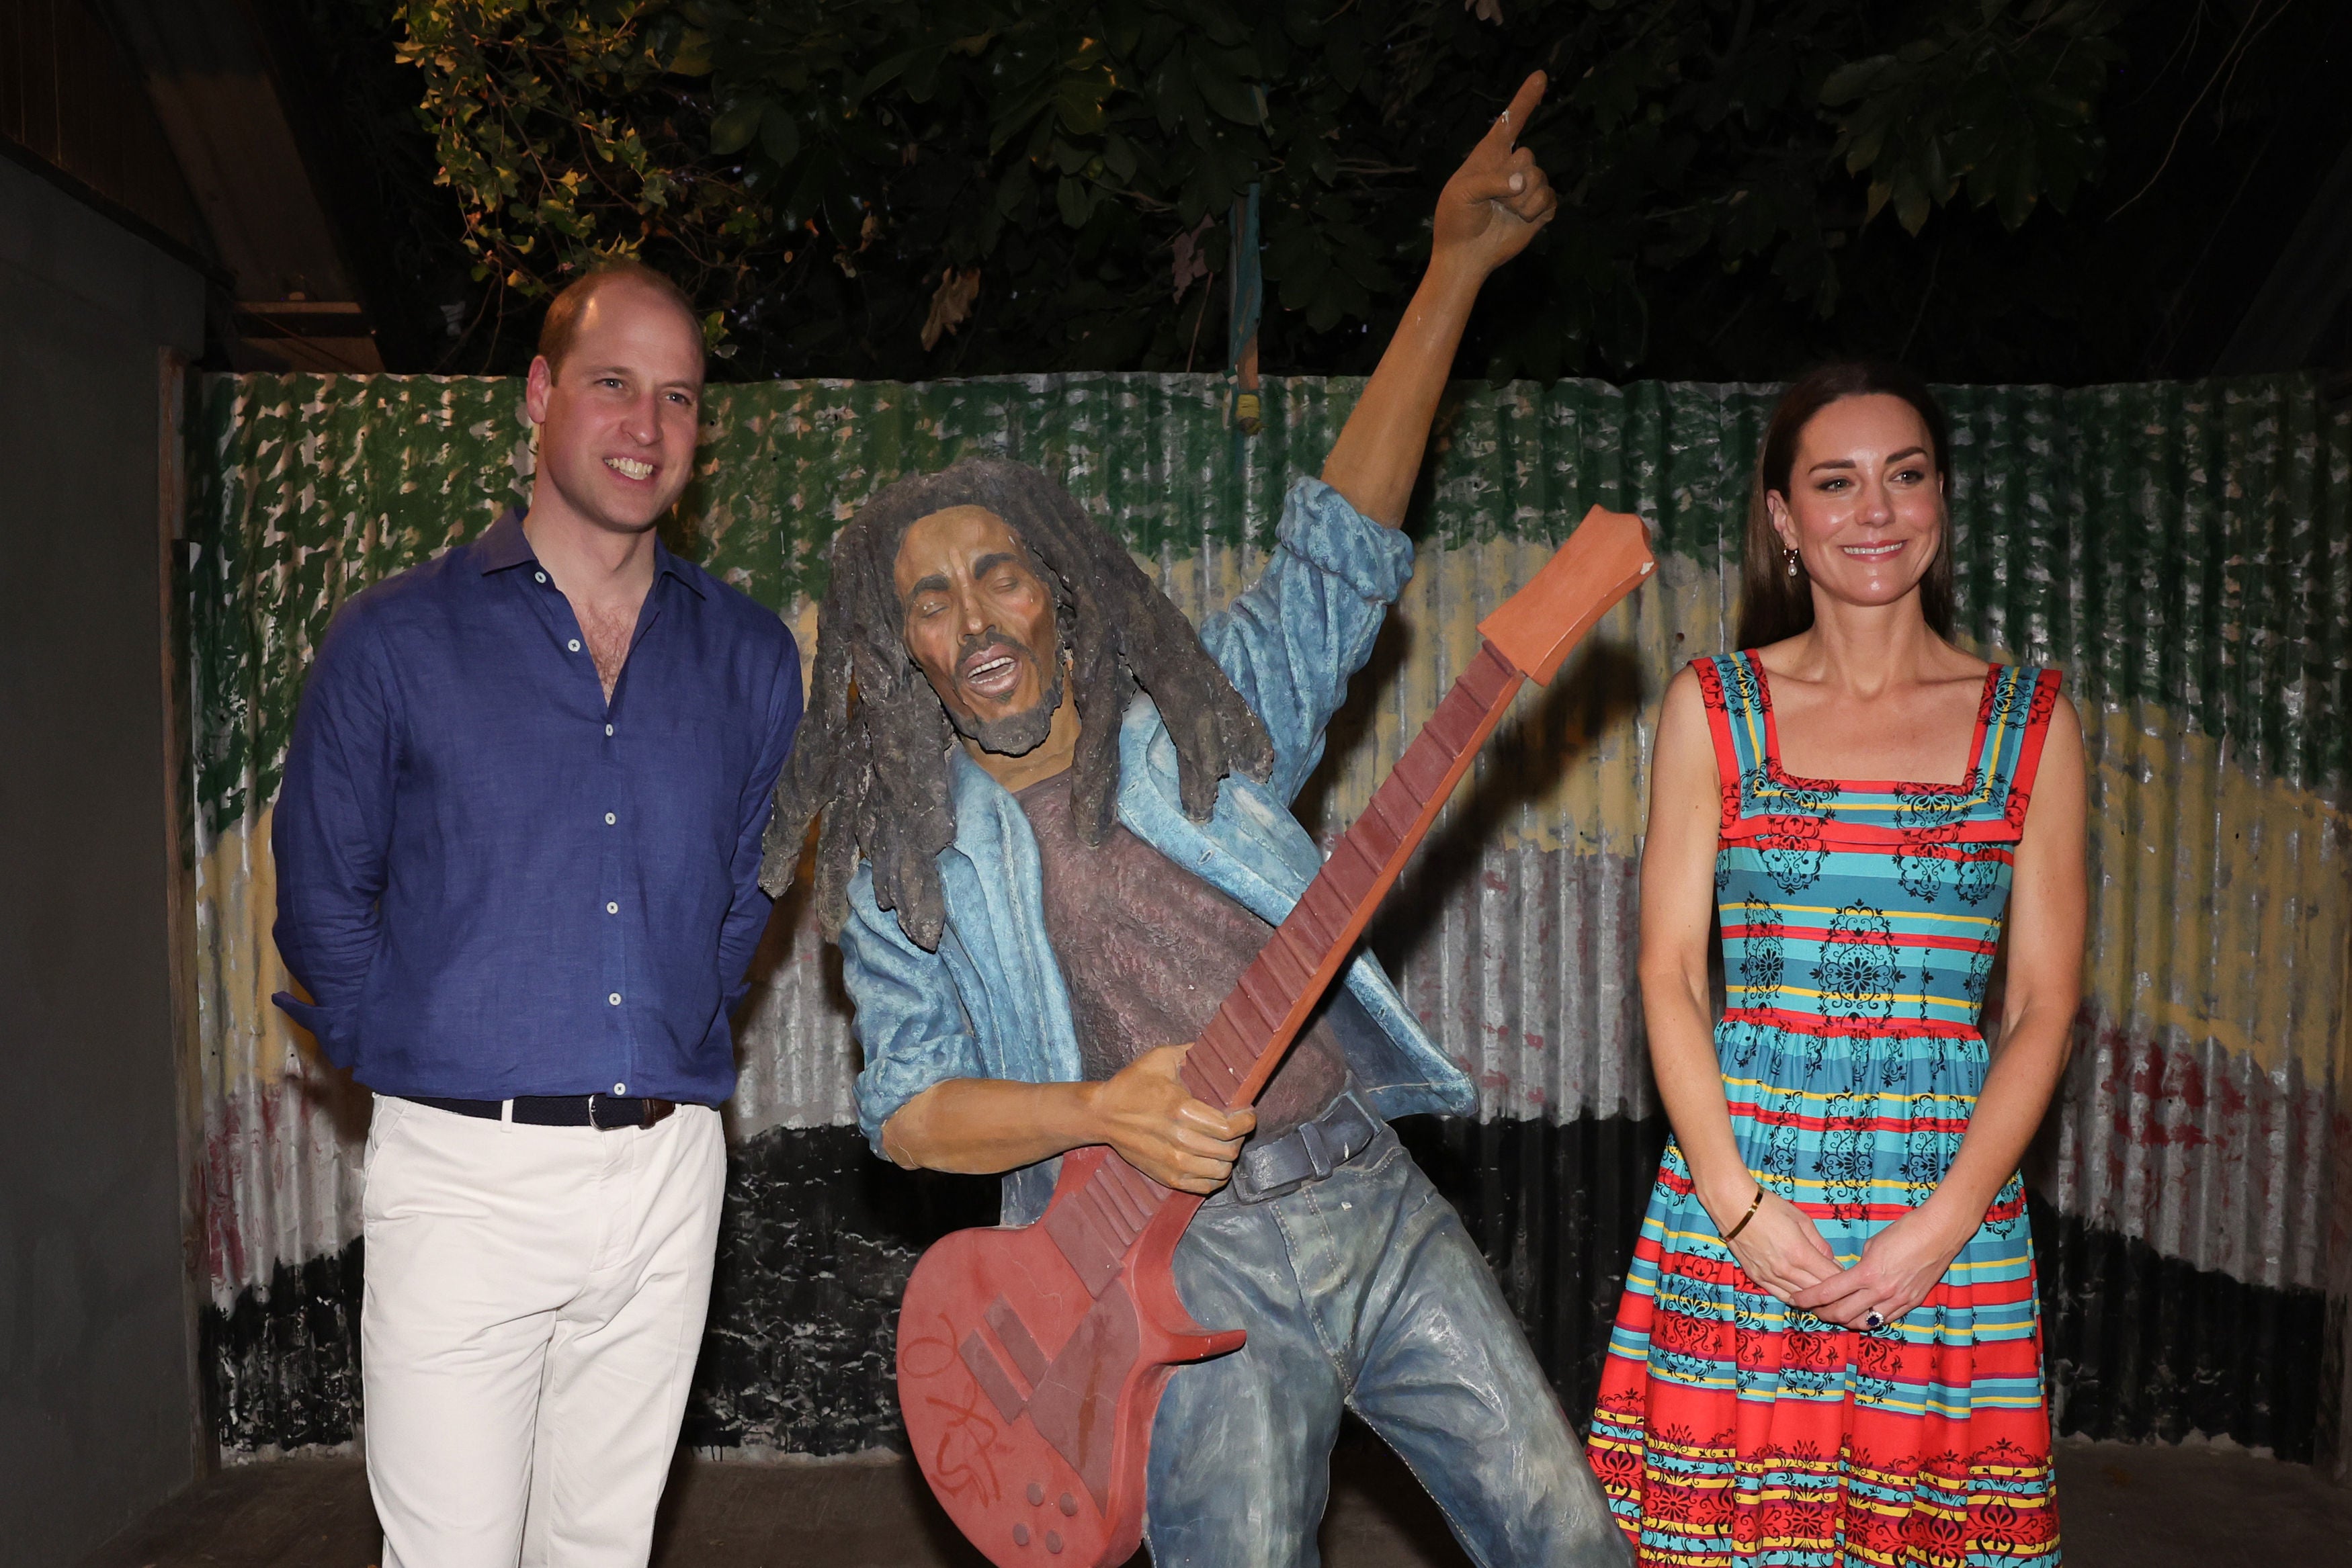 The Duke and Duchess of Cambridge during a visit to the Trench Town Culture Yard Museum